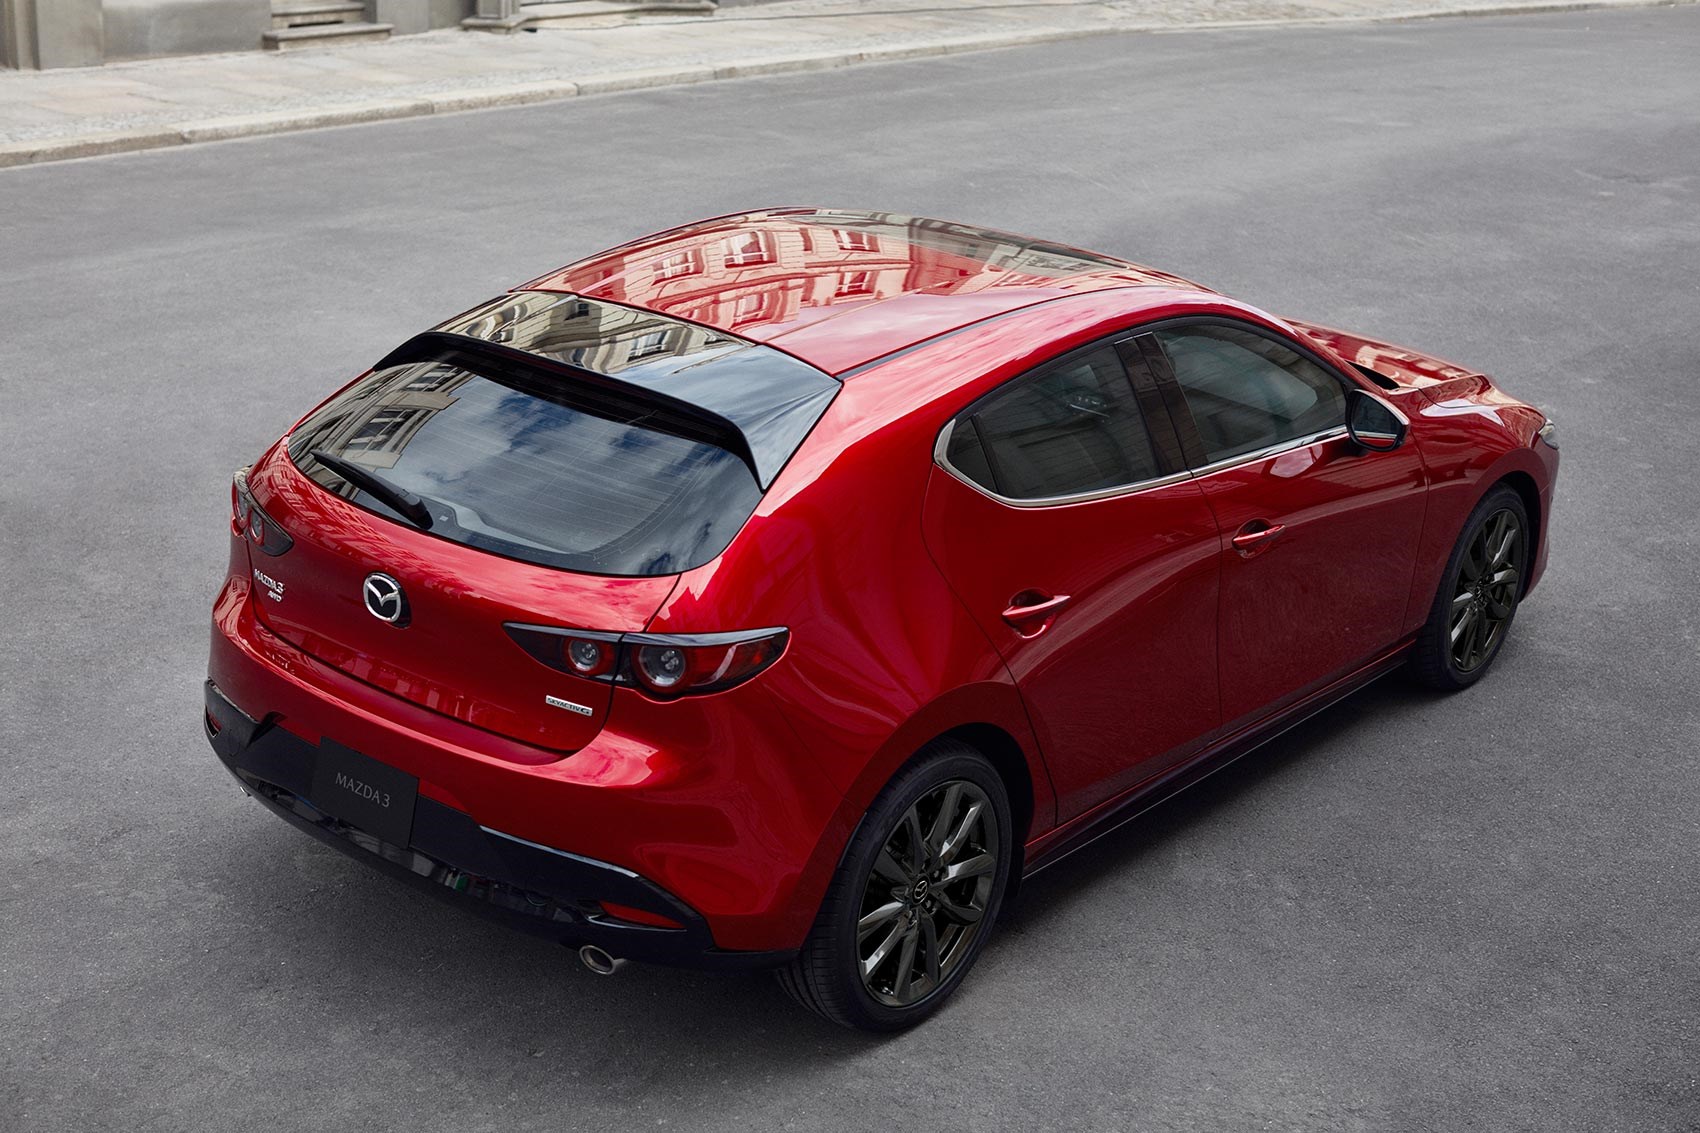 New 2019 Mazda 3 news and pictures | CAR Magazine